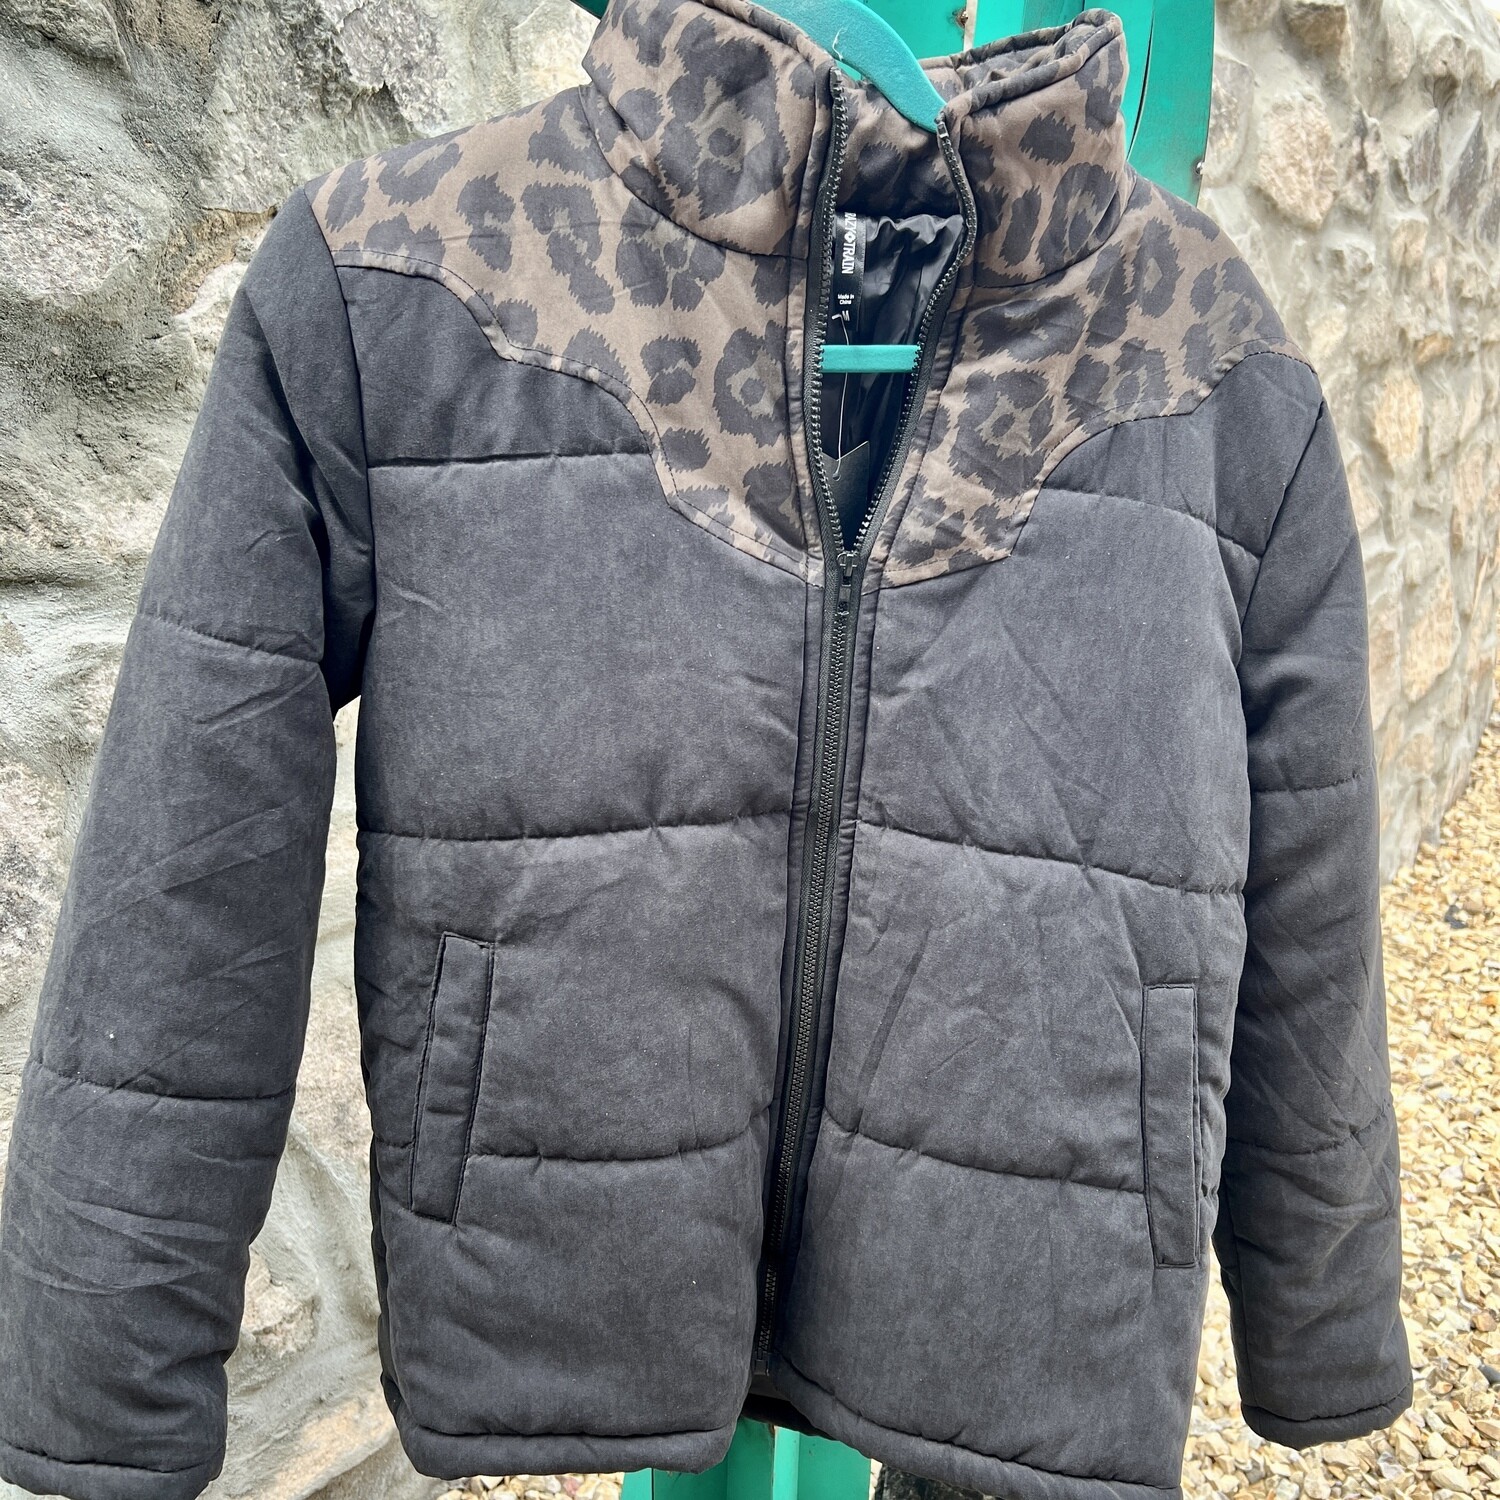 Leopard Black Puffer Jacket with Pockets - M